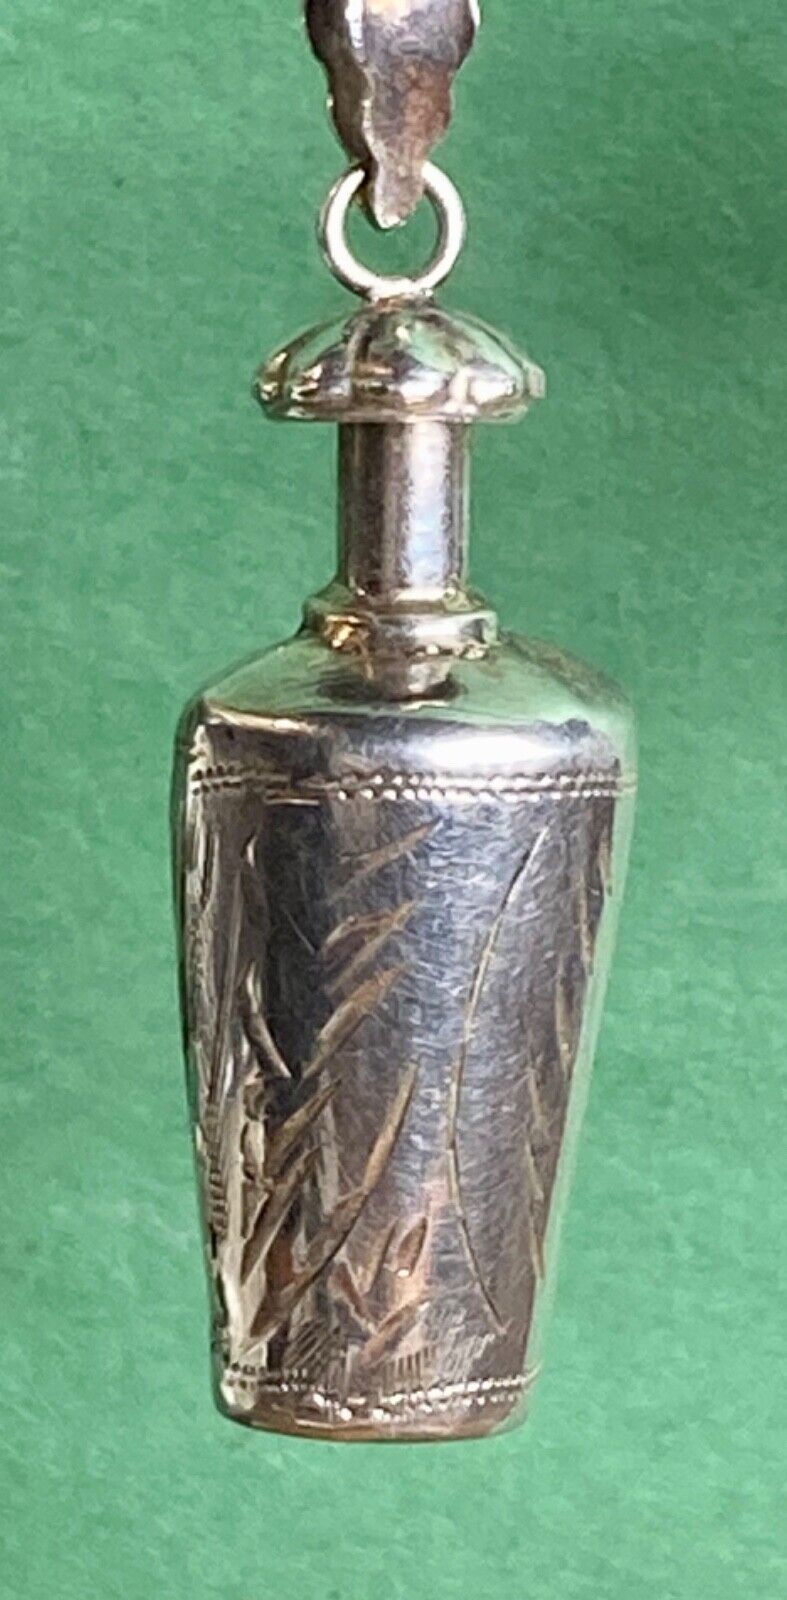 ANTIQUE ETCHED STERLING SILVER PENDANT CHARM  PERFUME BOTTLE FLASK W APPLICATOR